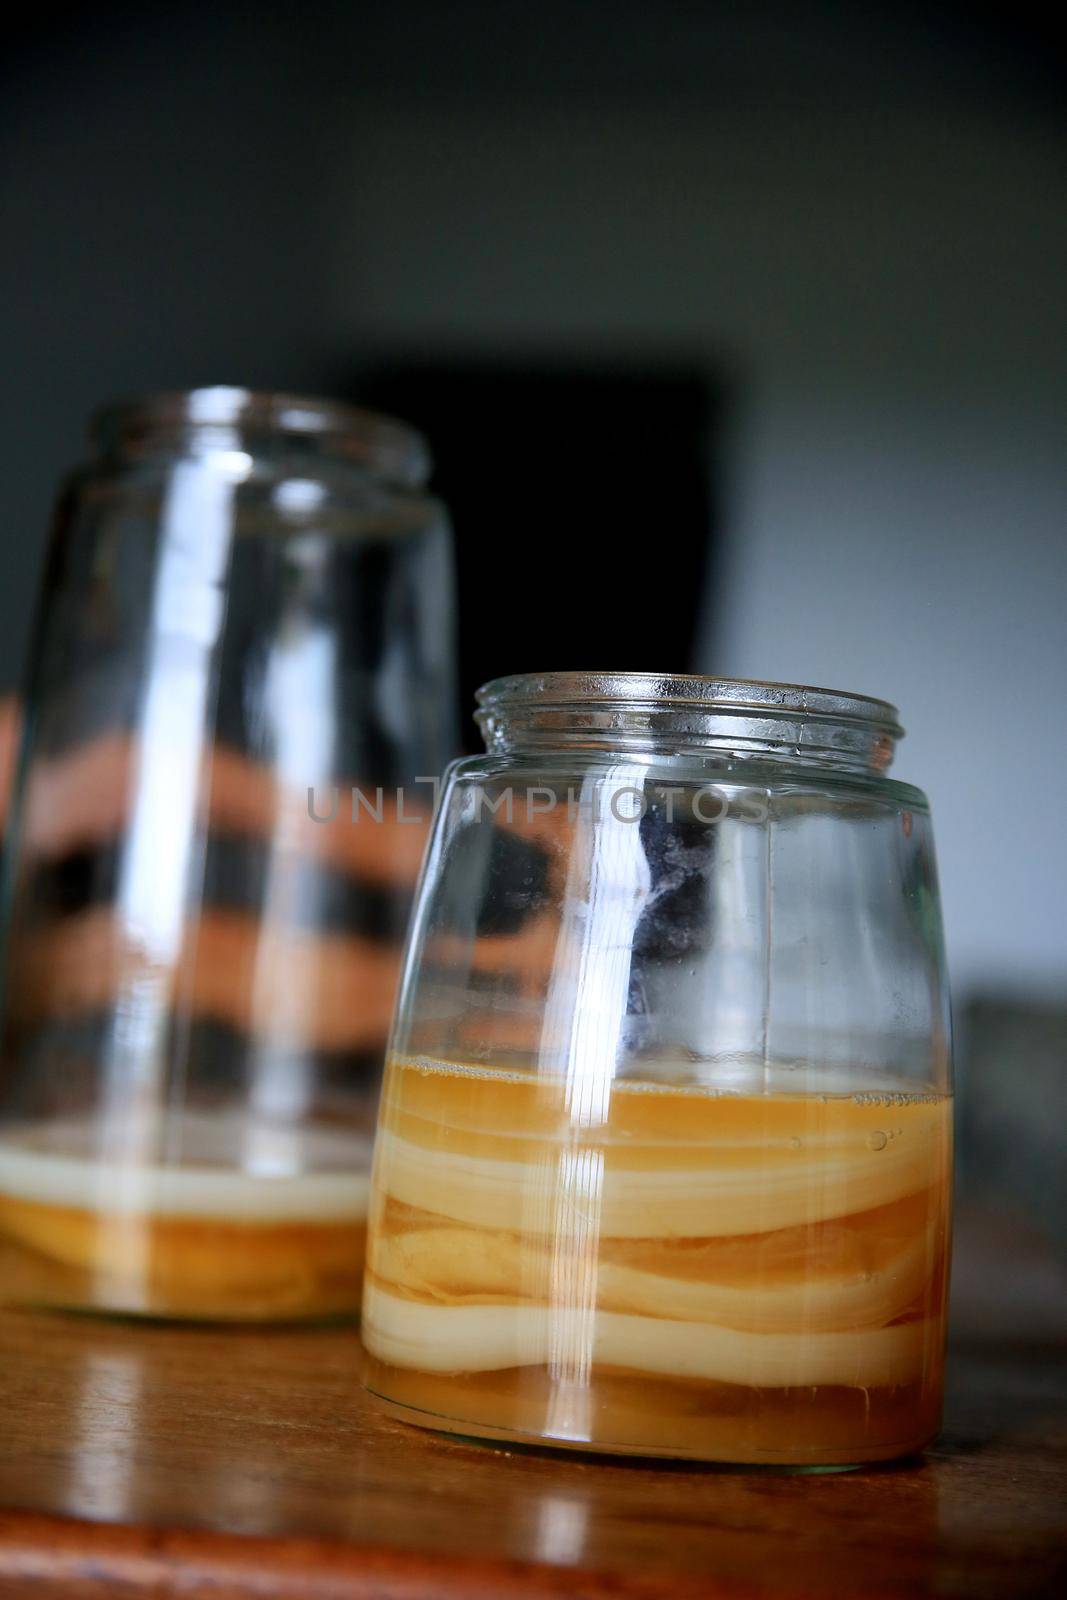 salvador, bahia / brazil - september 20, 2020: pot of scoby kombucha fermentation in phase 1, is seen in the city of Salvador.